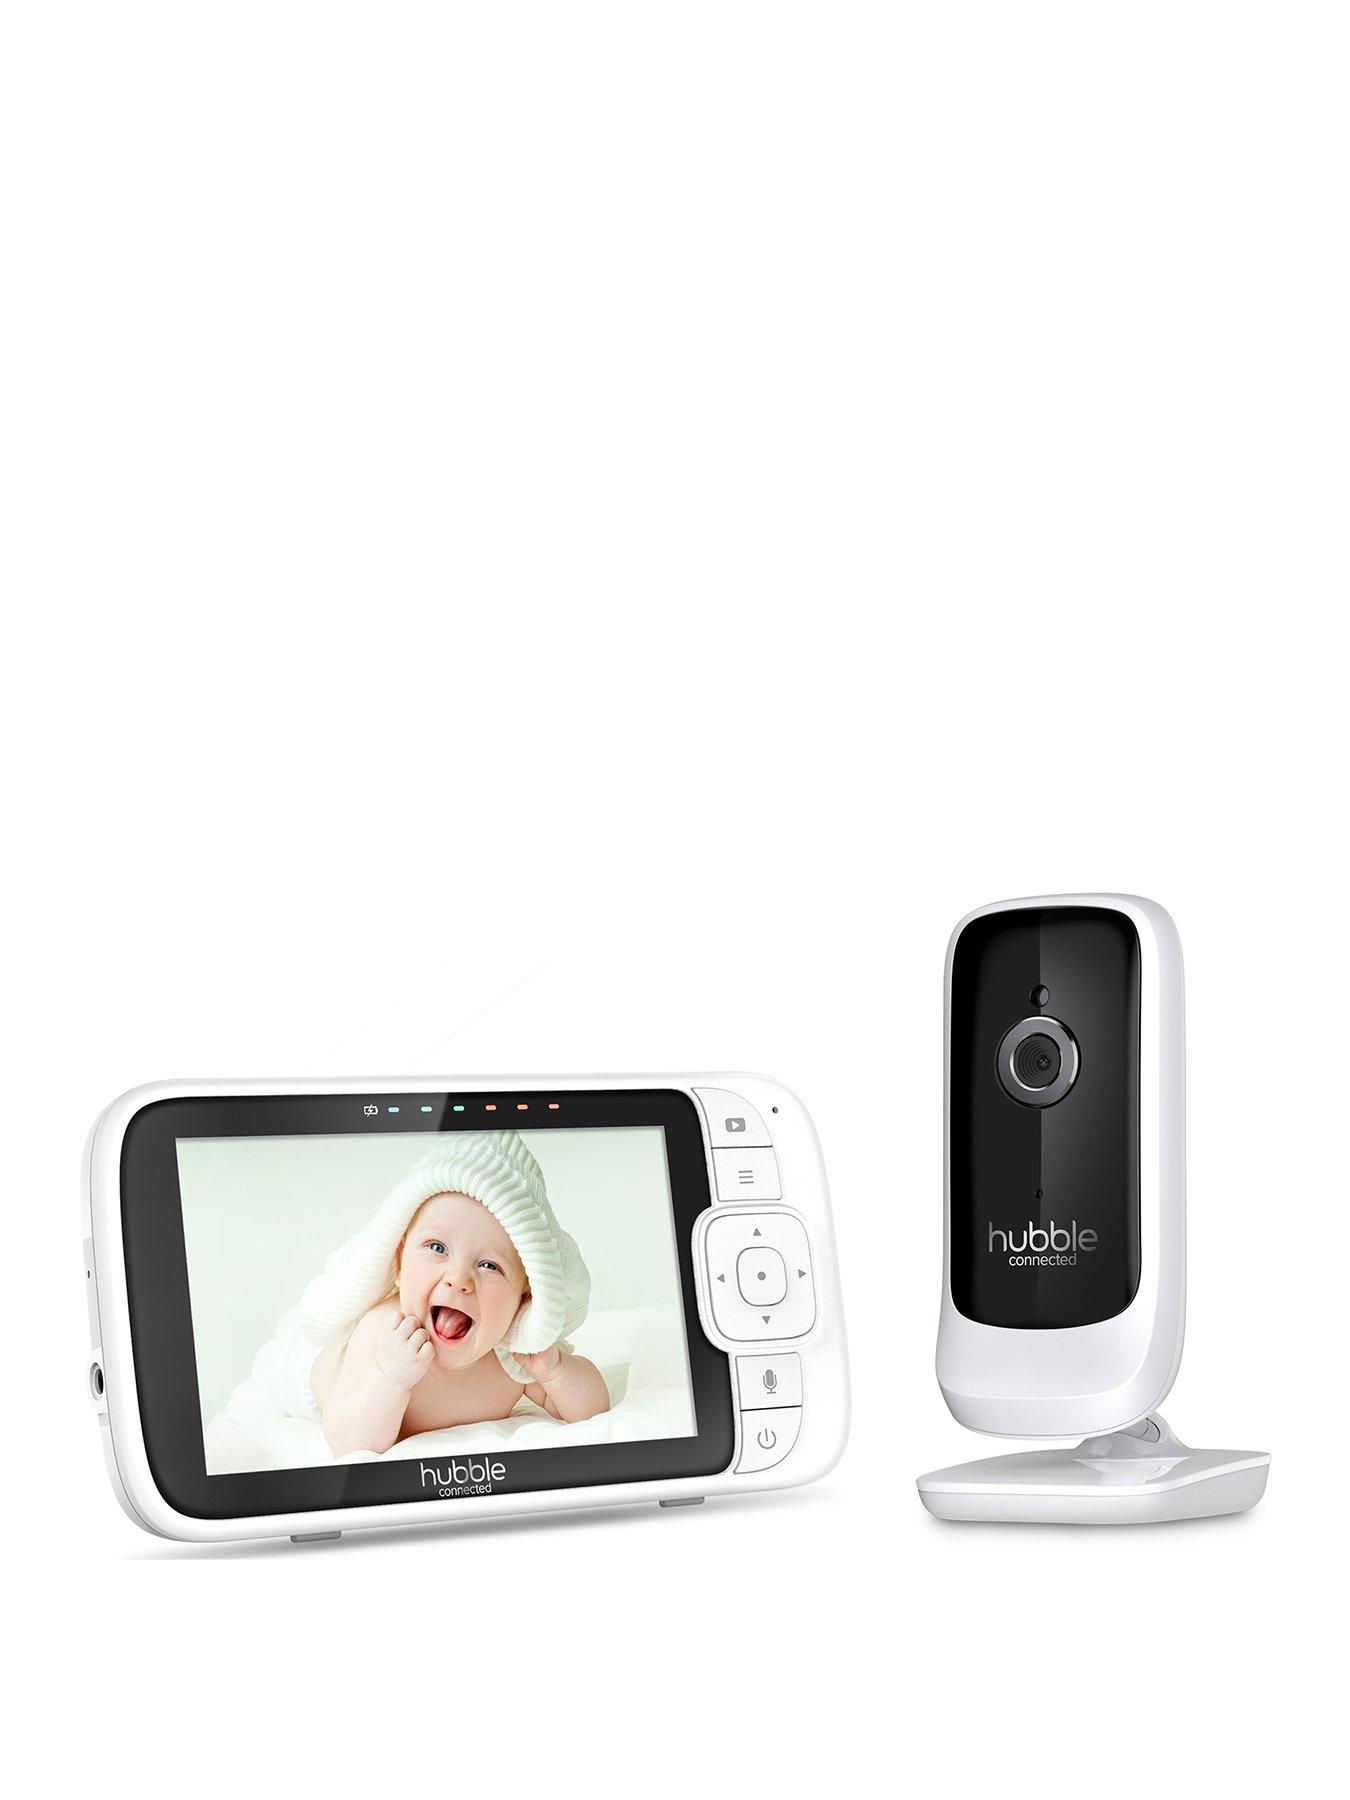 Babymoov Expert Care - Baby Monitor with High Performance Low Emission  Safety Digital Green Technology